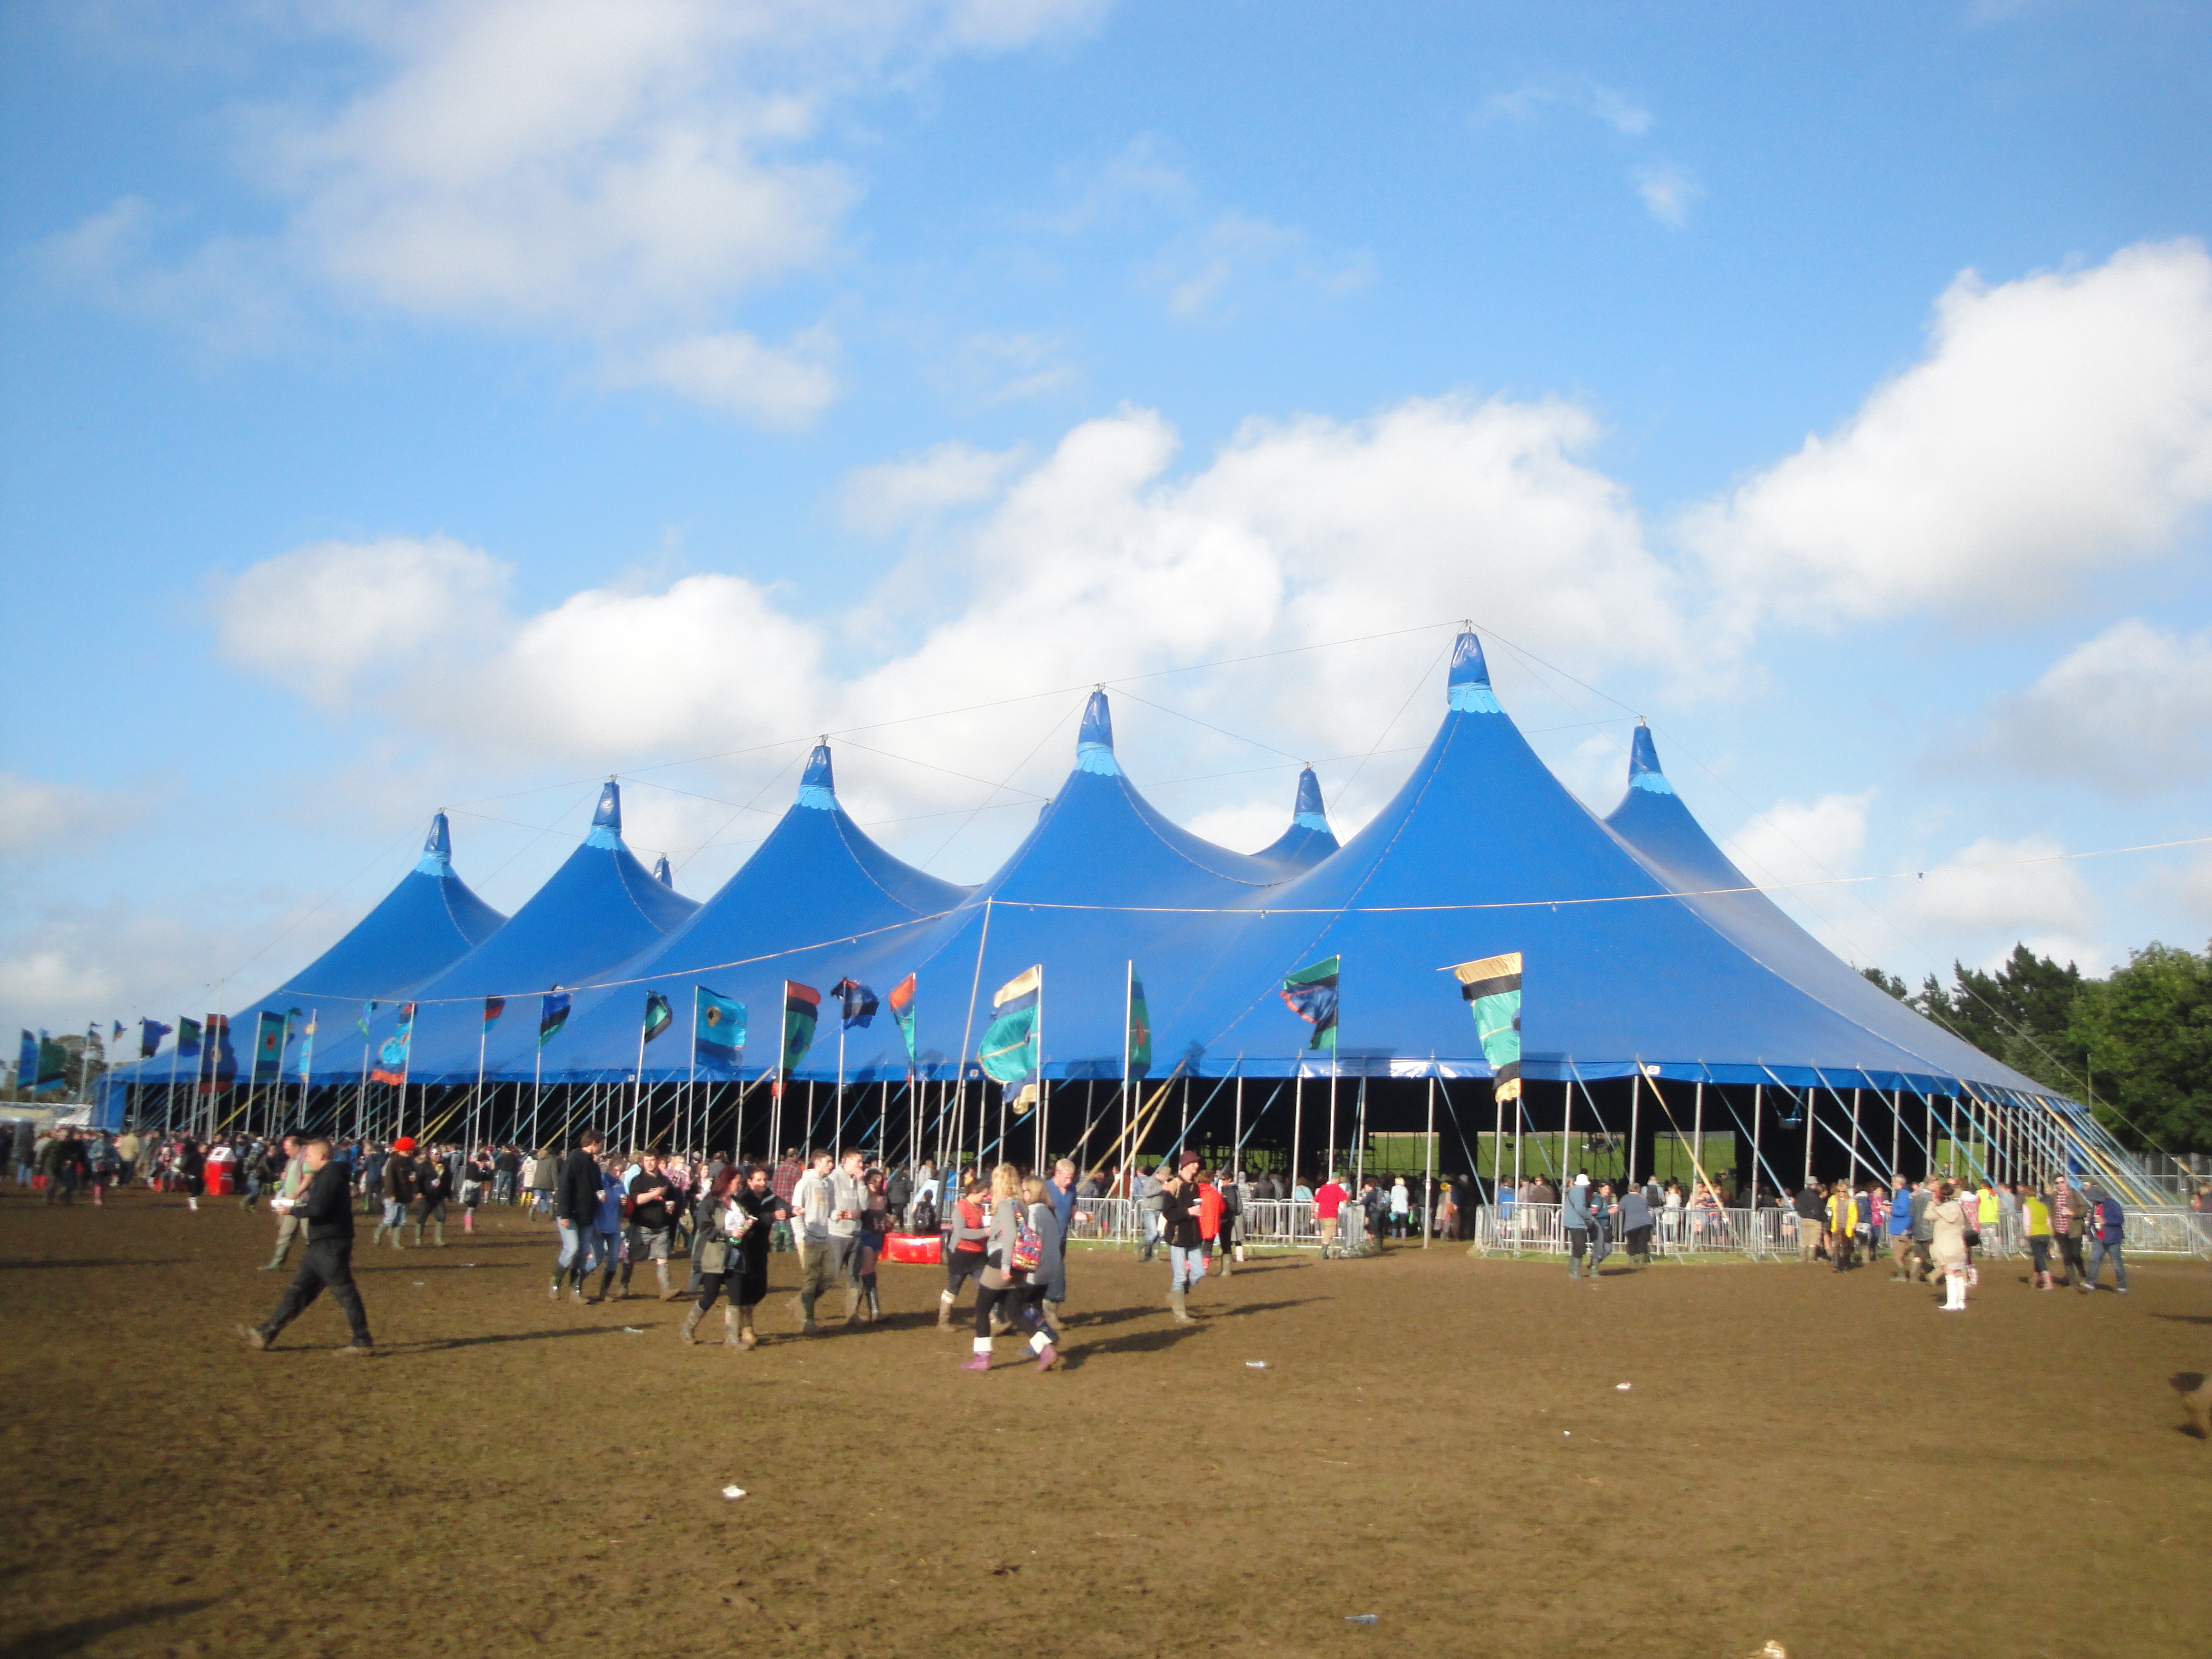 File:Isle of Wight Festival 2012 Big Top Arena 2.JPG - Wikimedia Commons